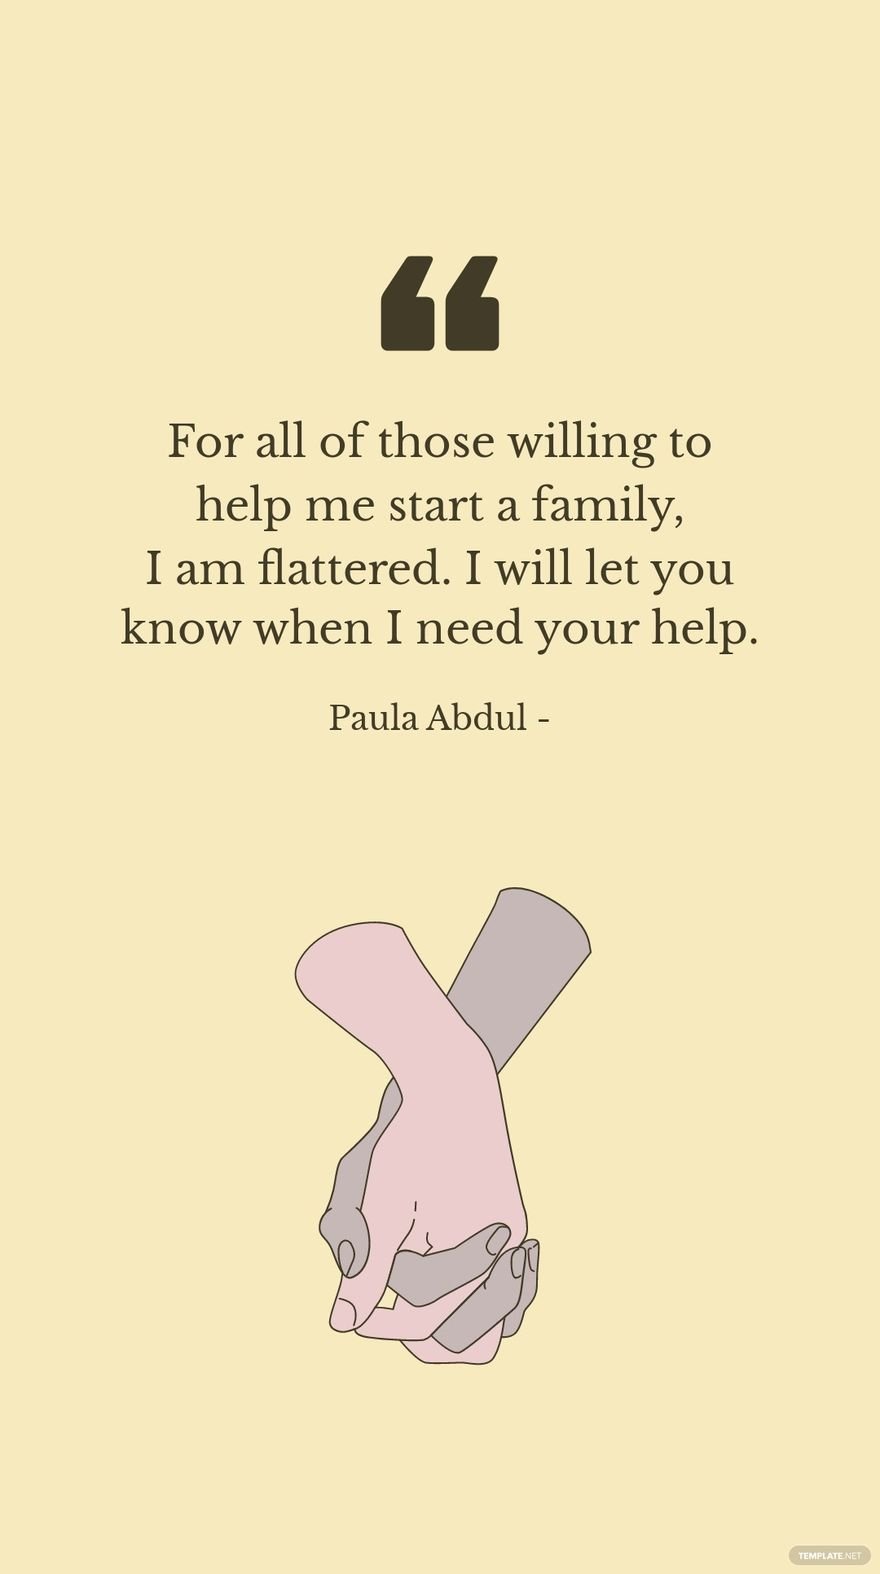 Paula Abdul - For all of those willing to help me start a family, I am flattered. I will let you know when I need your help.